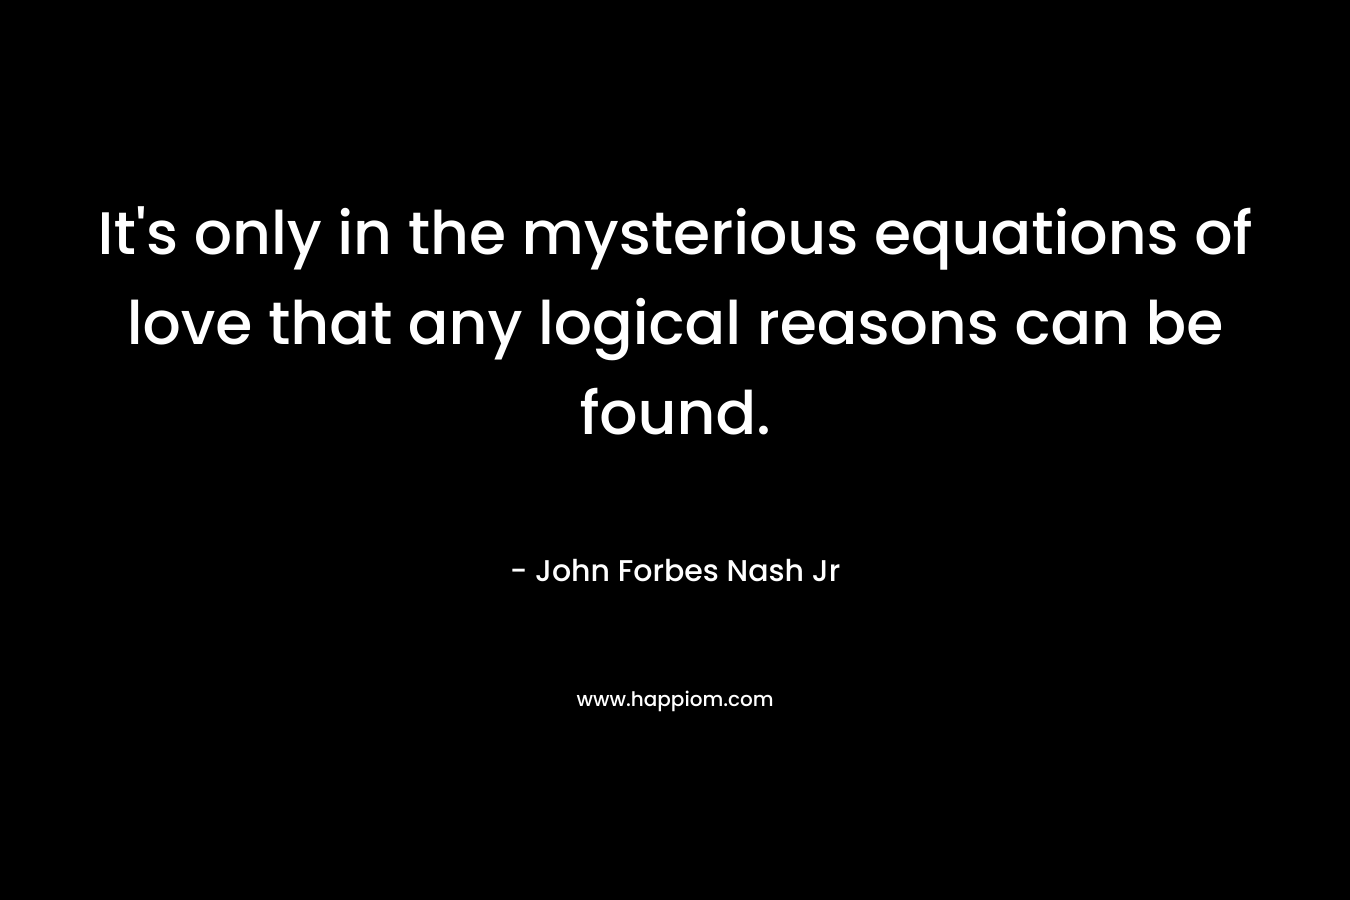 It's only in the mysterious equations of love that any logical reasons can be found.